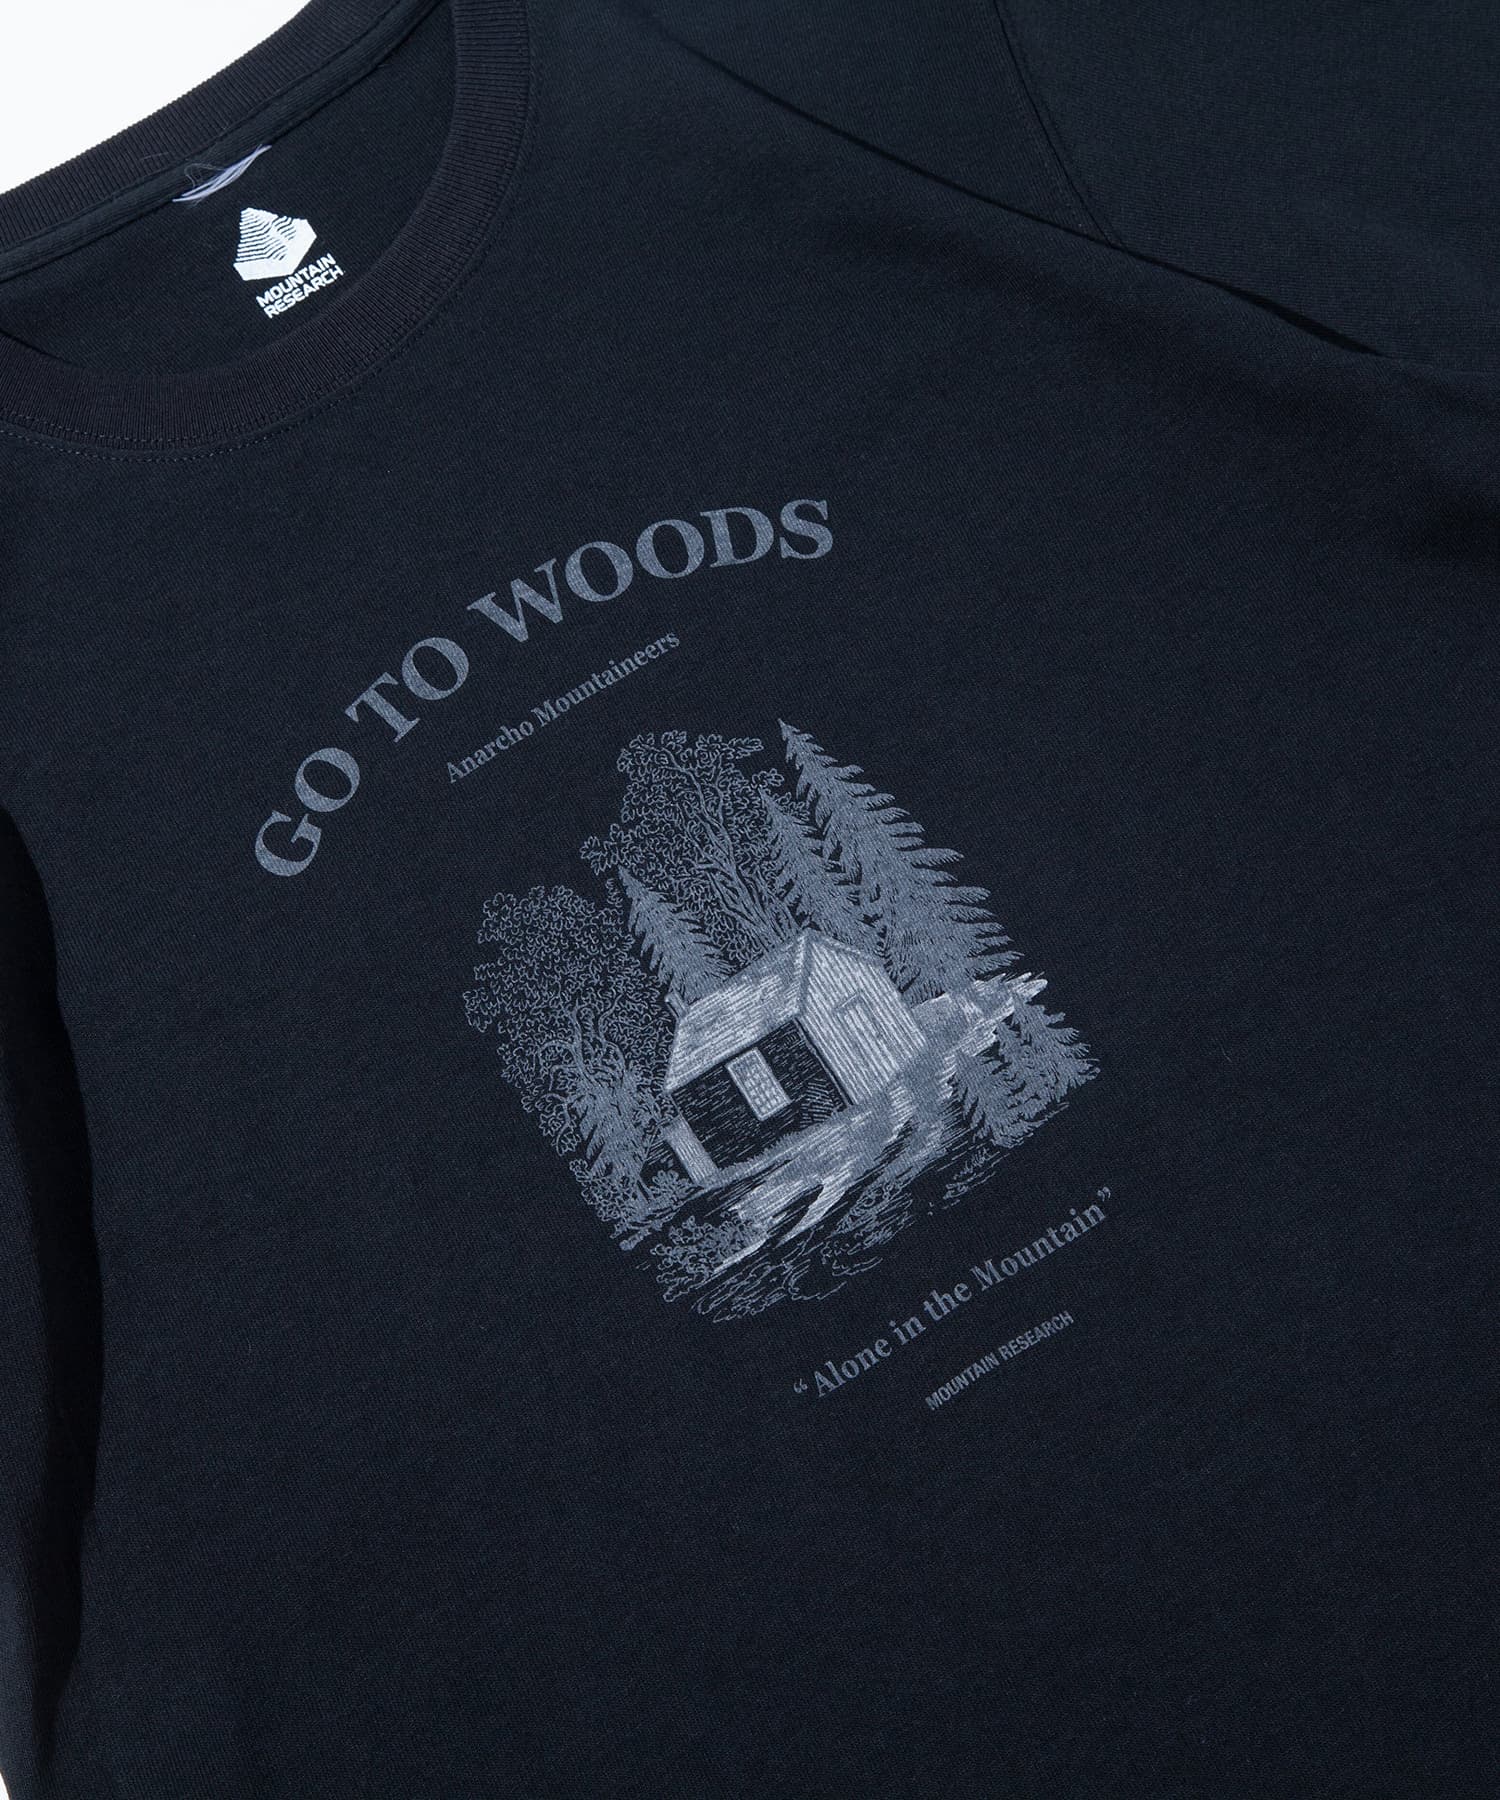 MOUNTAIN RESEARCH G.T.W Tee / マウンテンリサーチ G.T.W Tシャツ